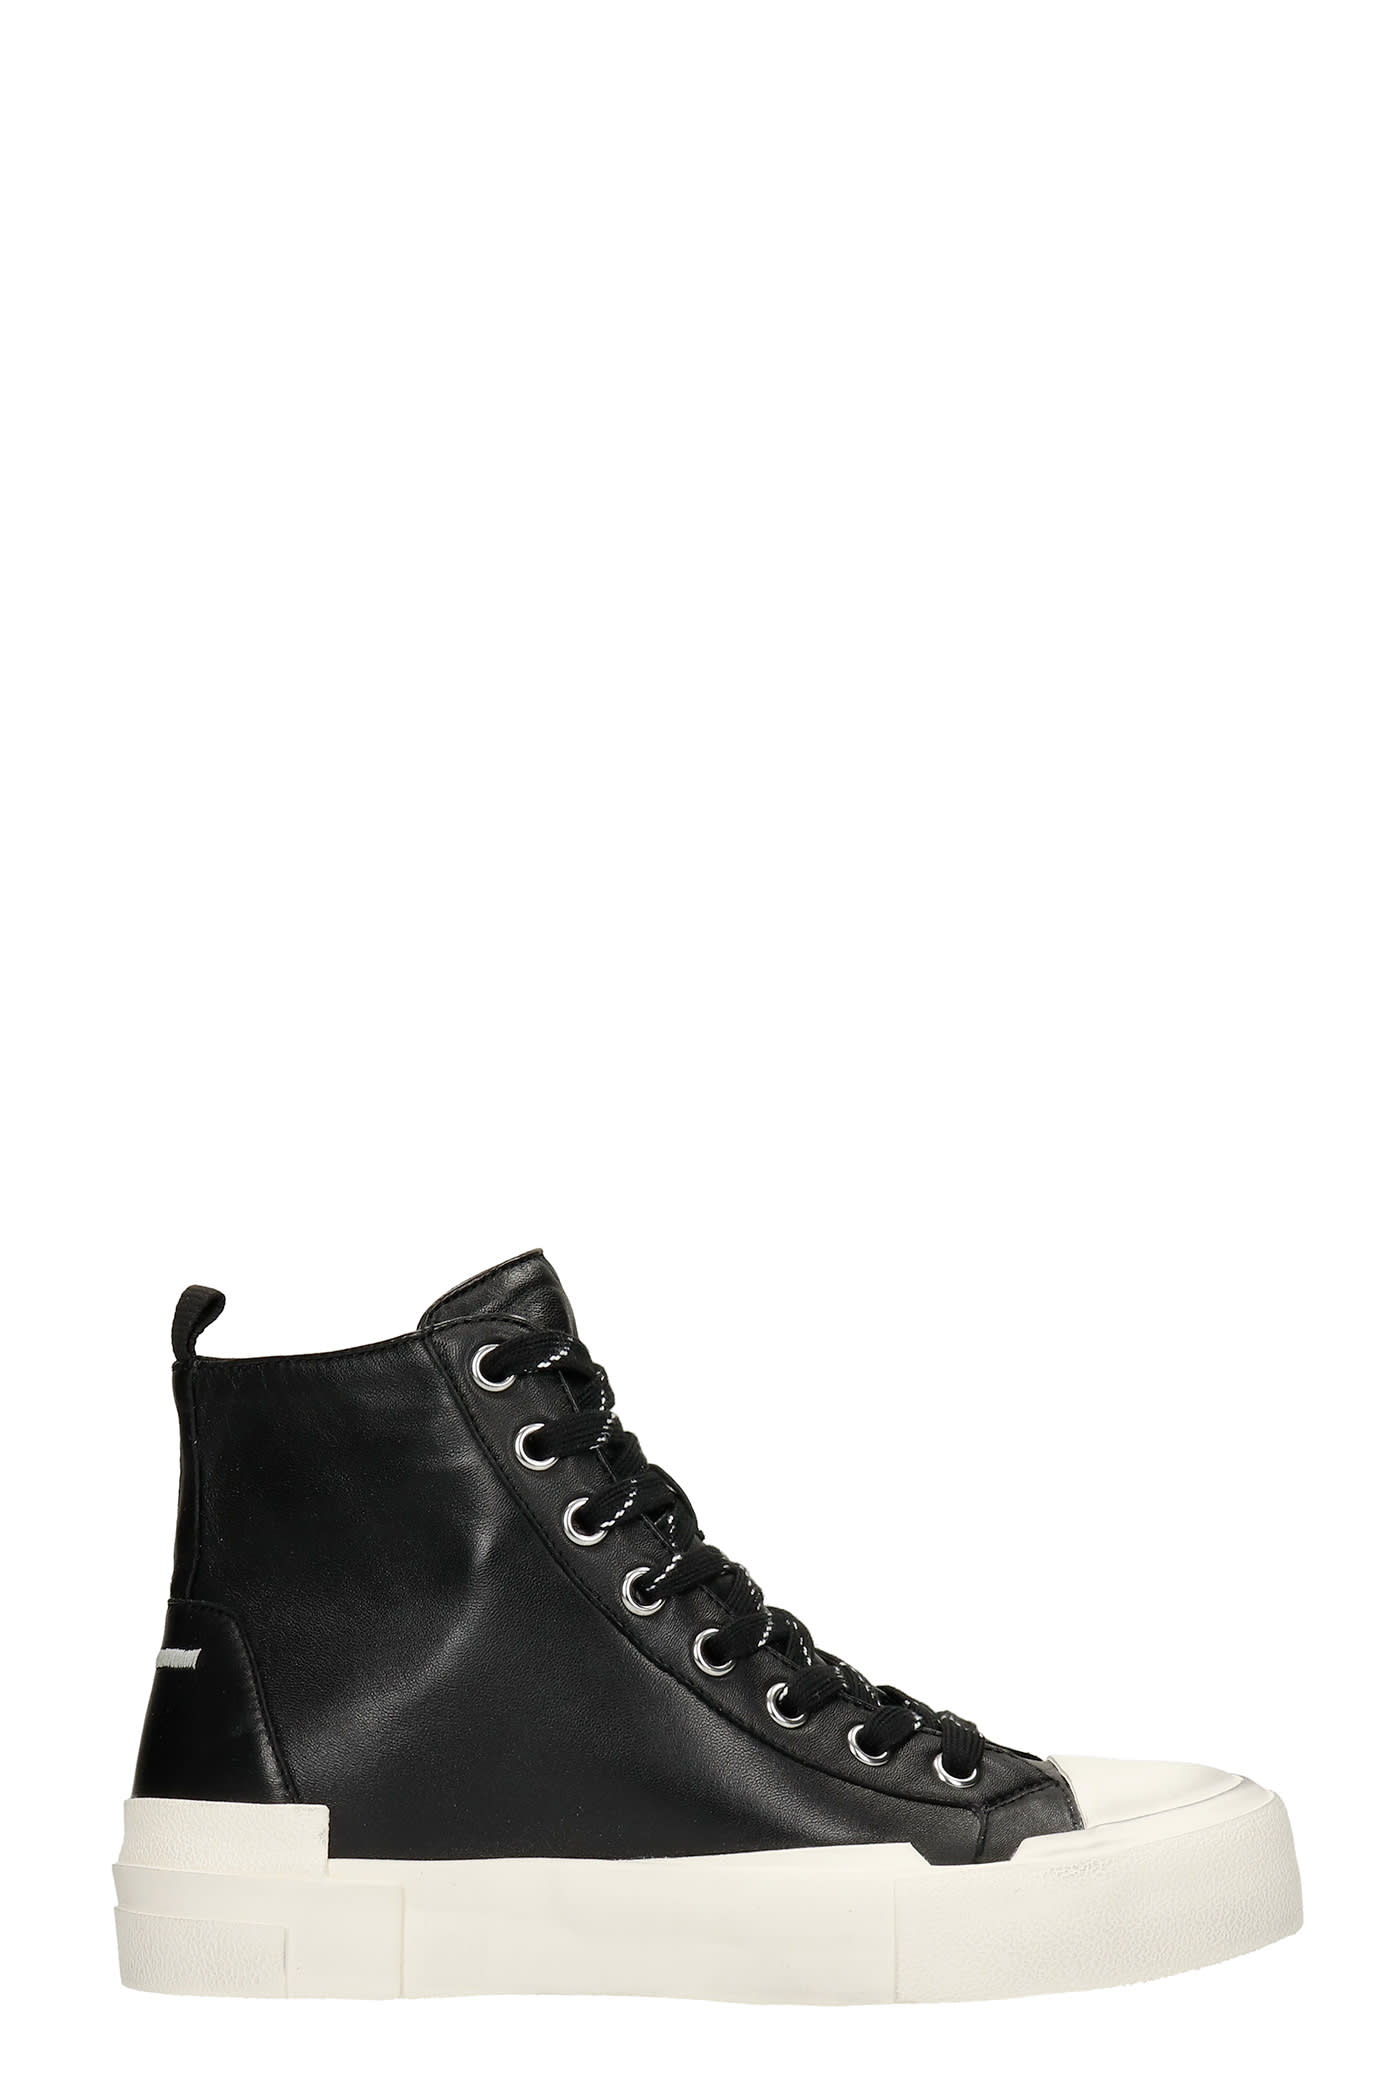 Ash Ghibly Bis Sneakers In Black Leather